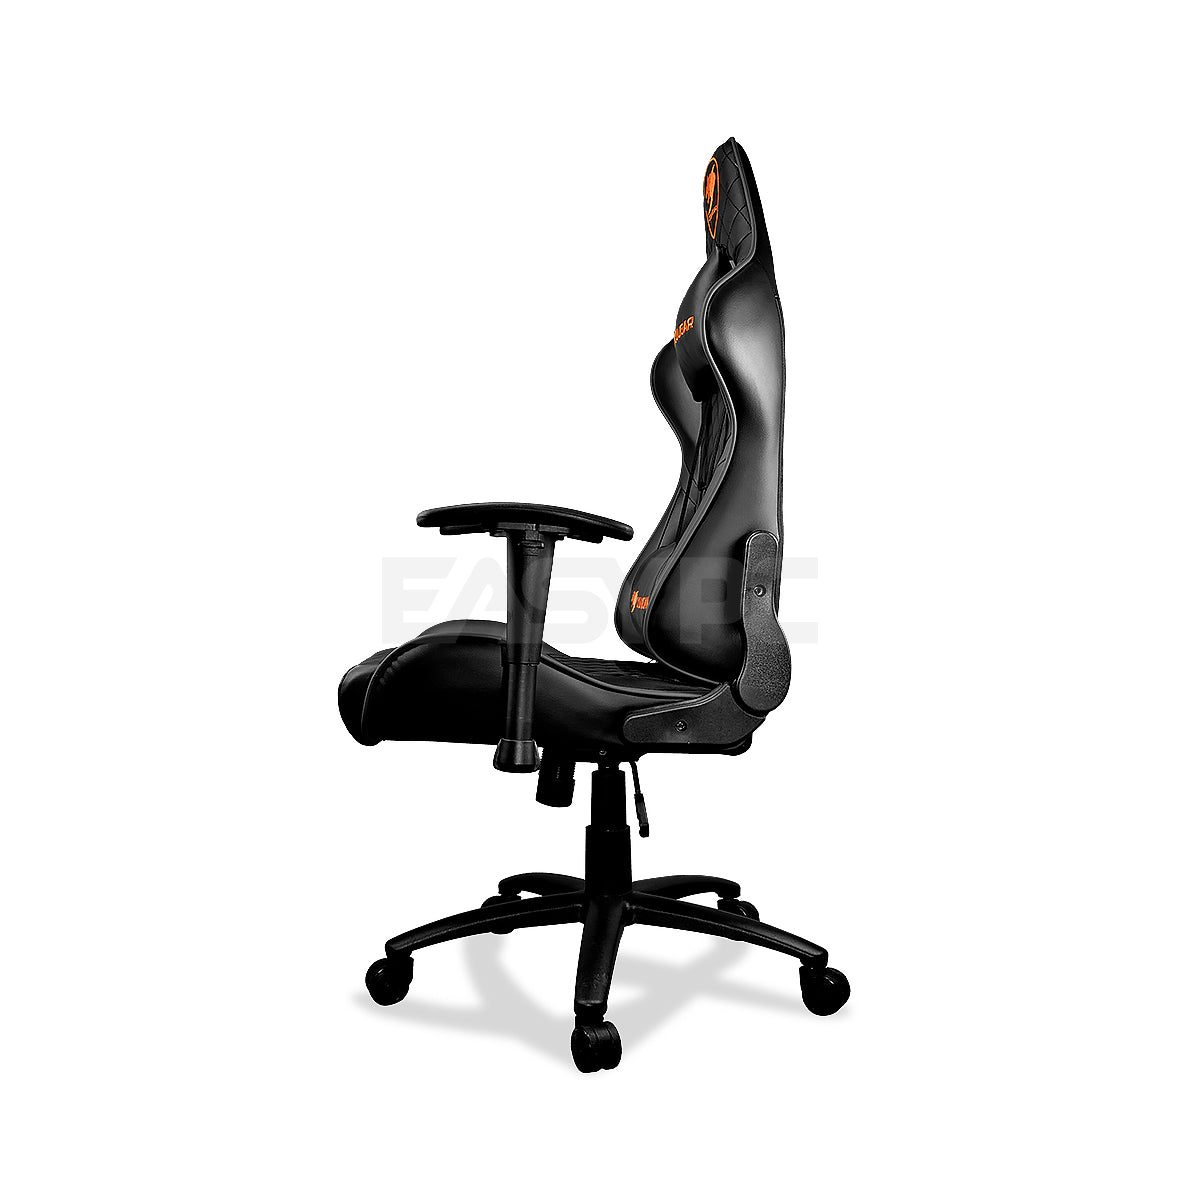 Cougar Armor One Gaming Chair Black-c